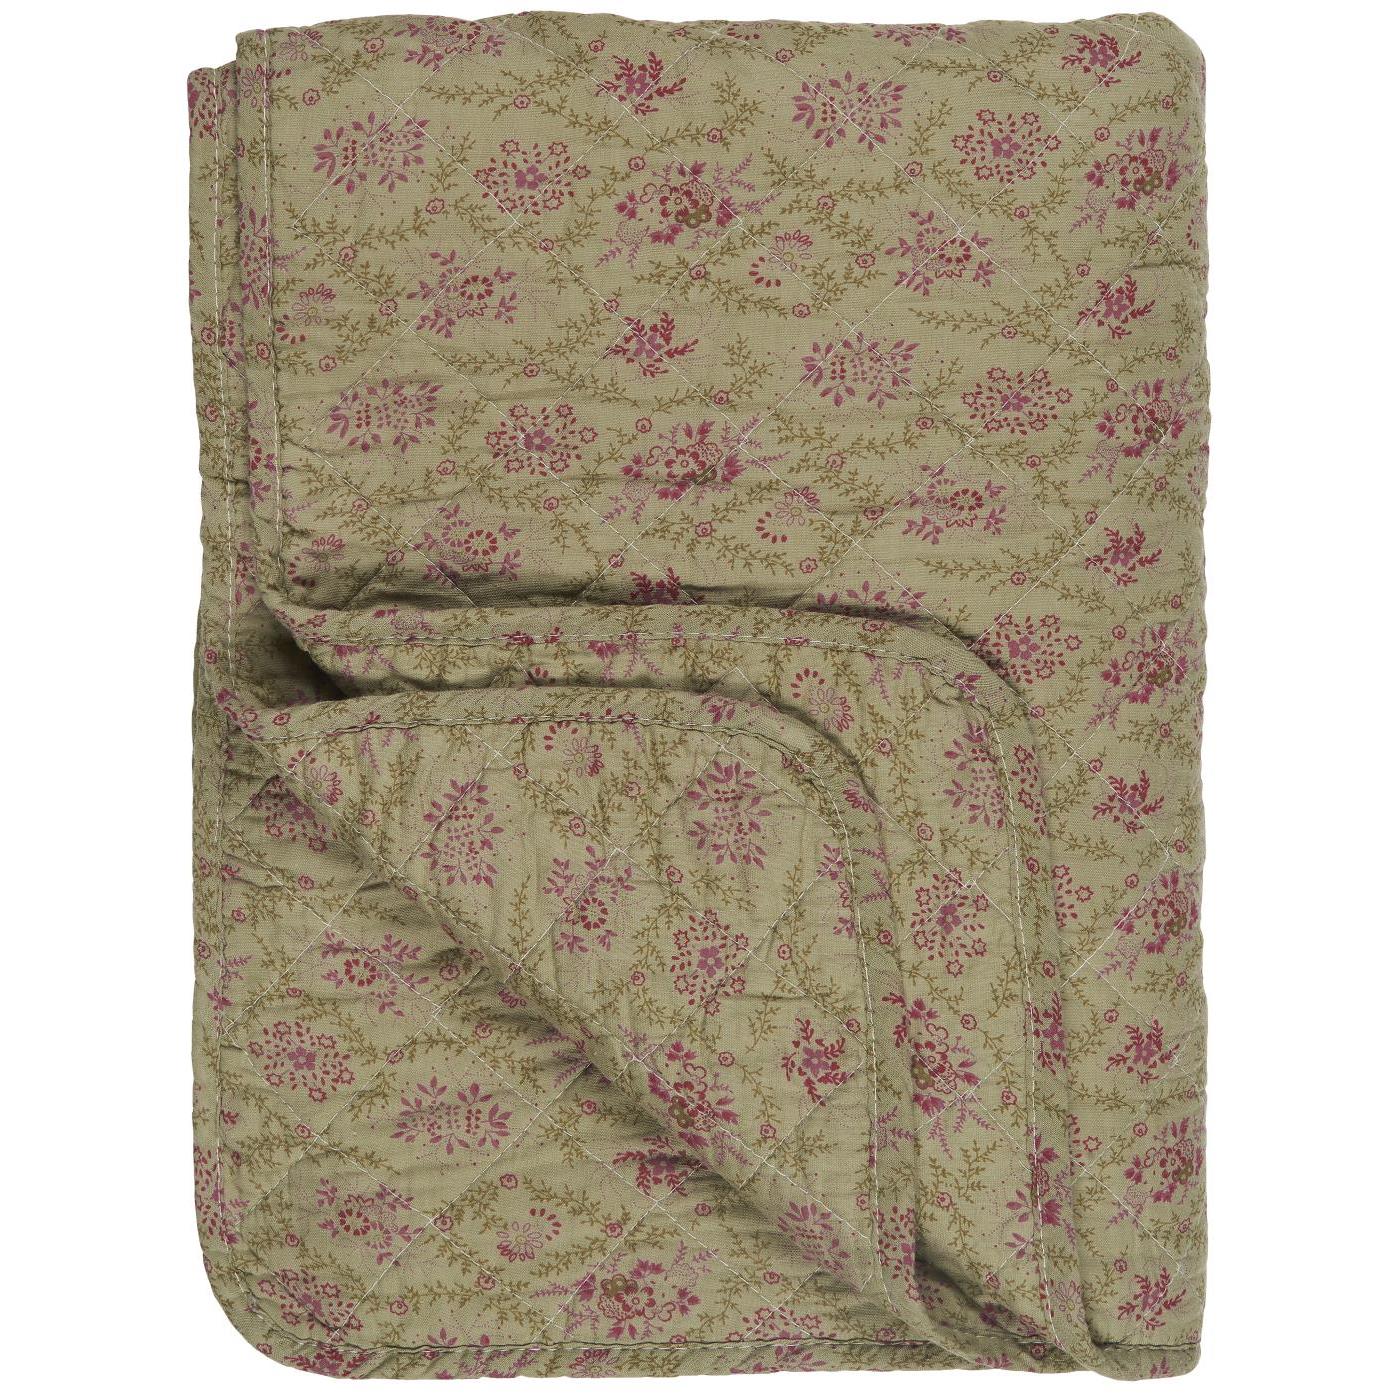 QUILT - Olive Green/Pink Flowers/Green Leaves